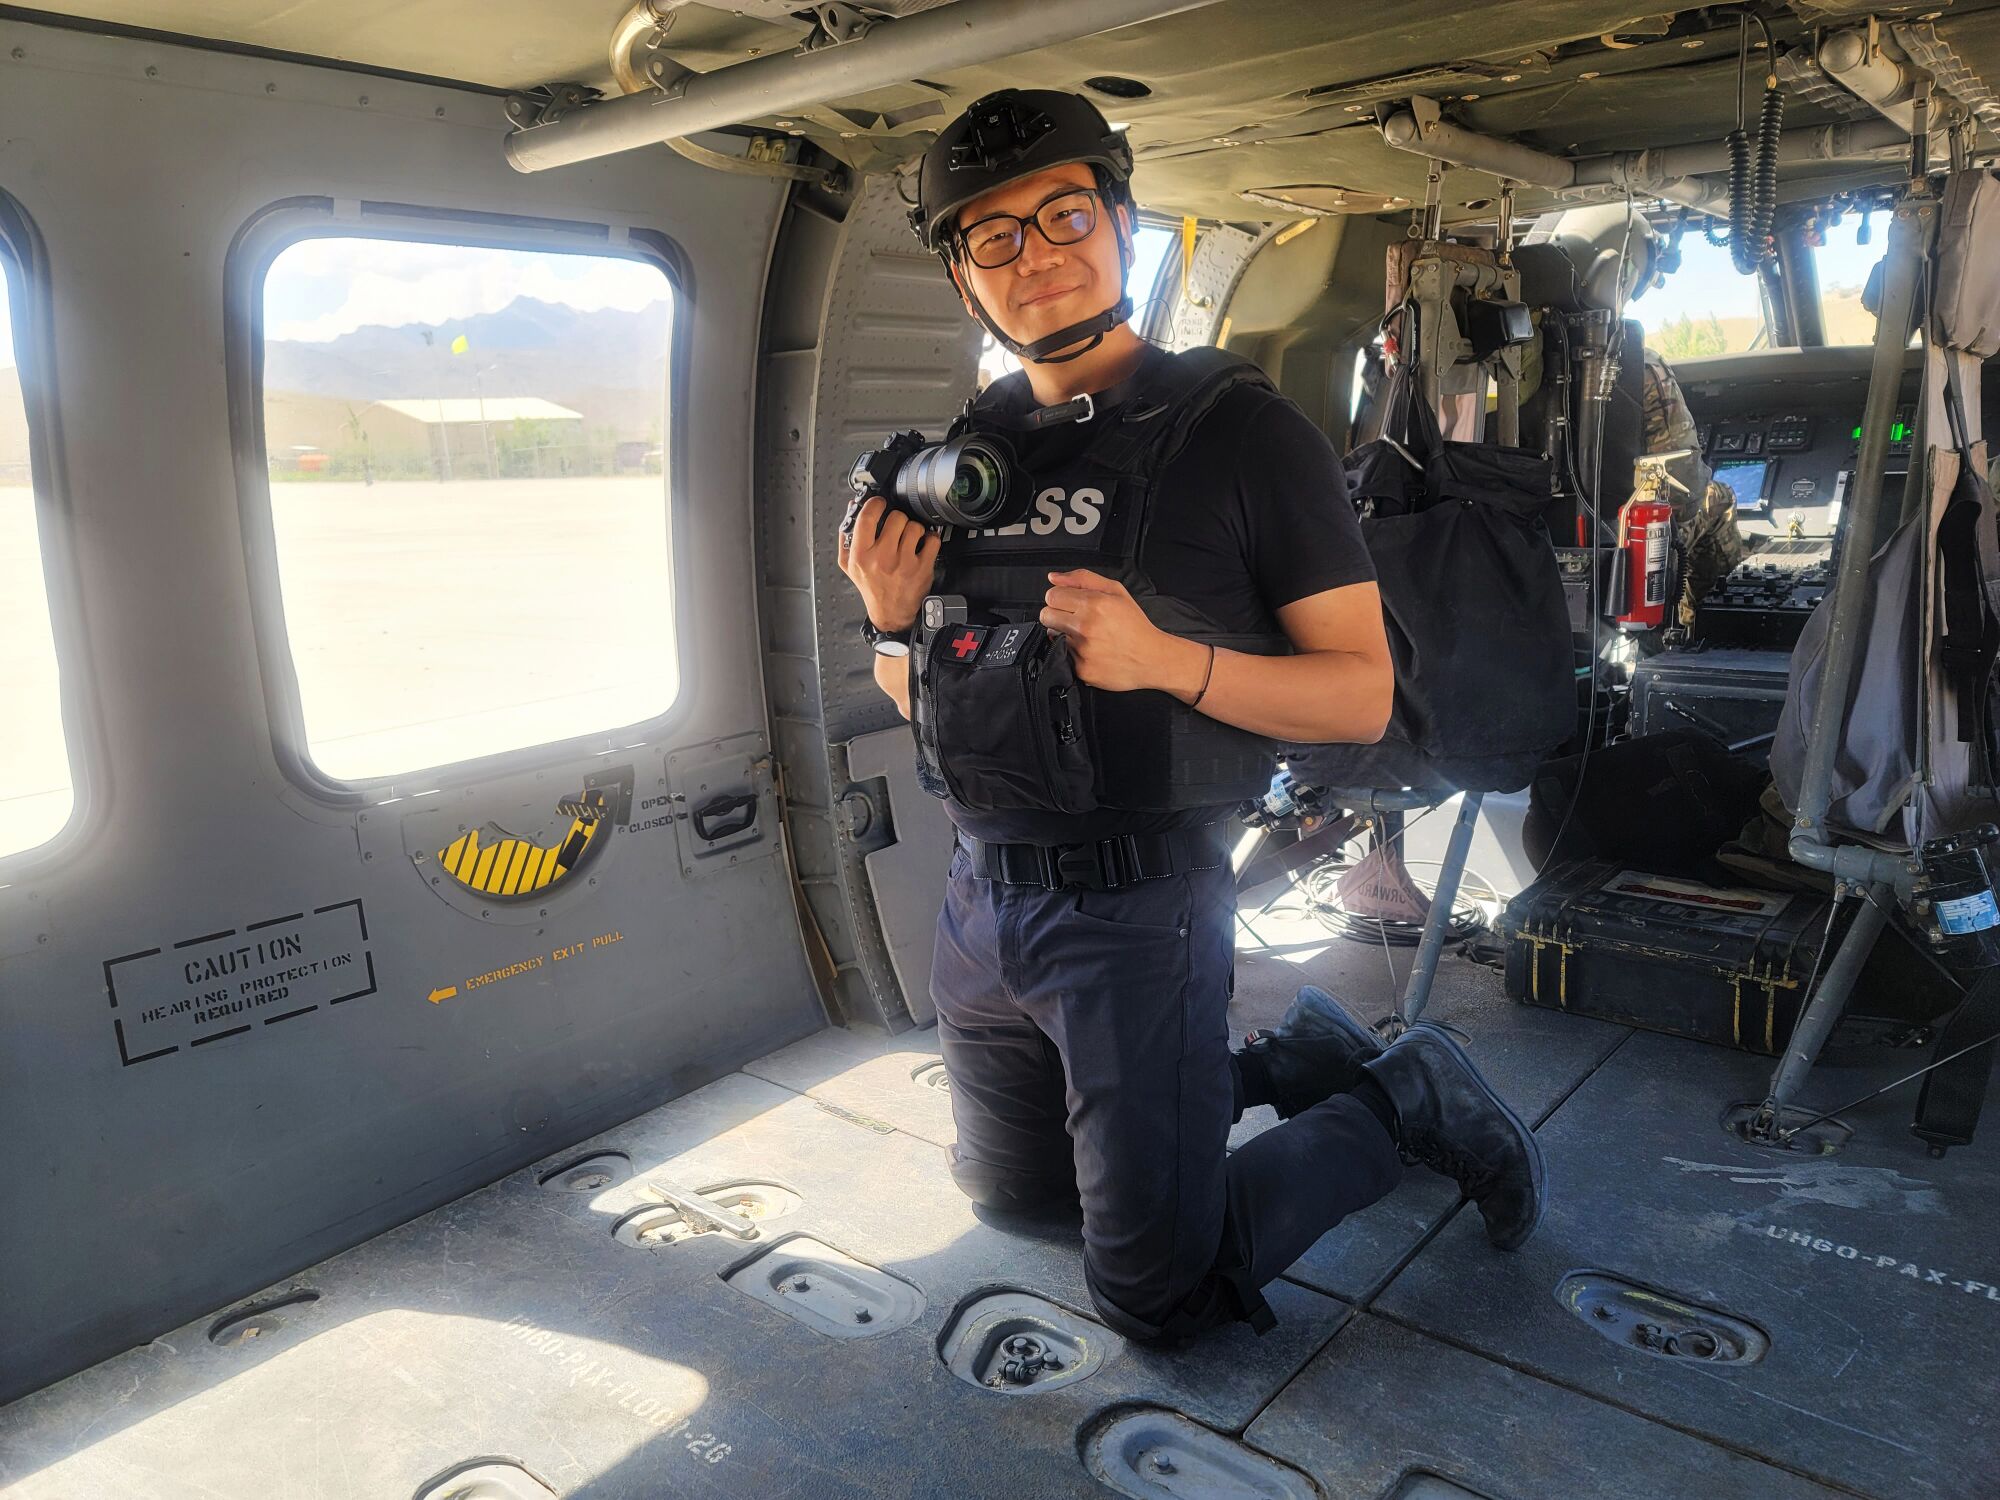 A man kneeling and smiling while holding a camera in a helicopter.